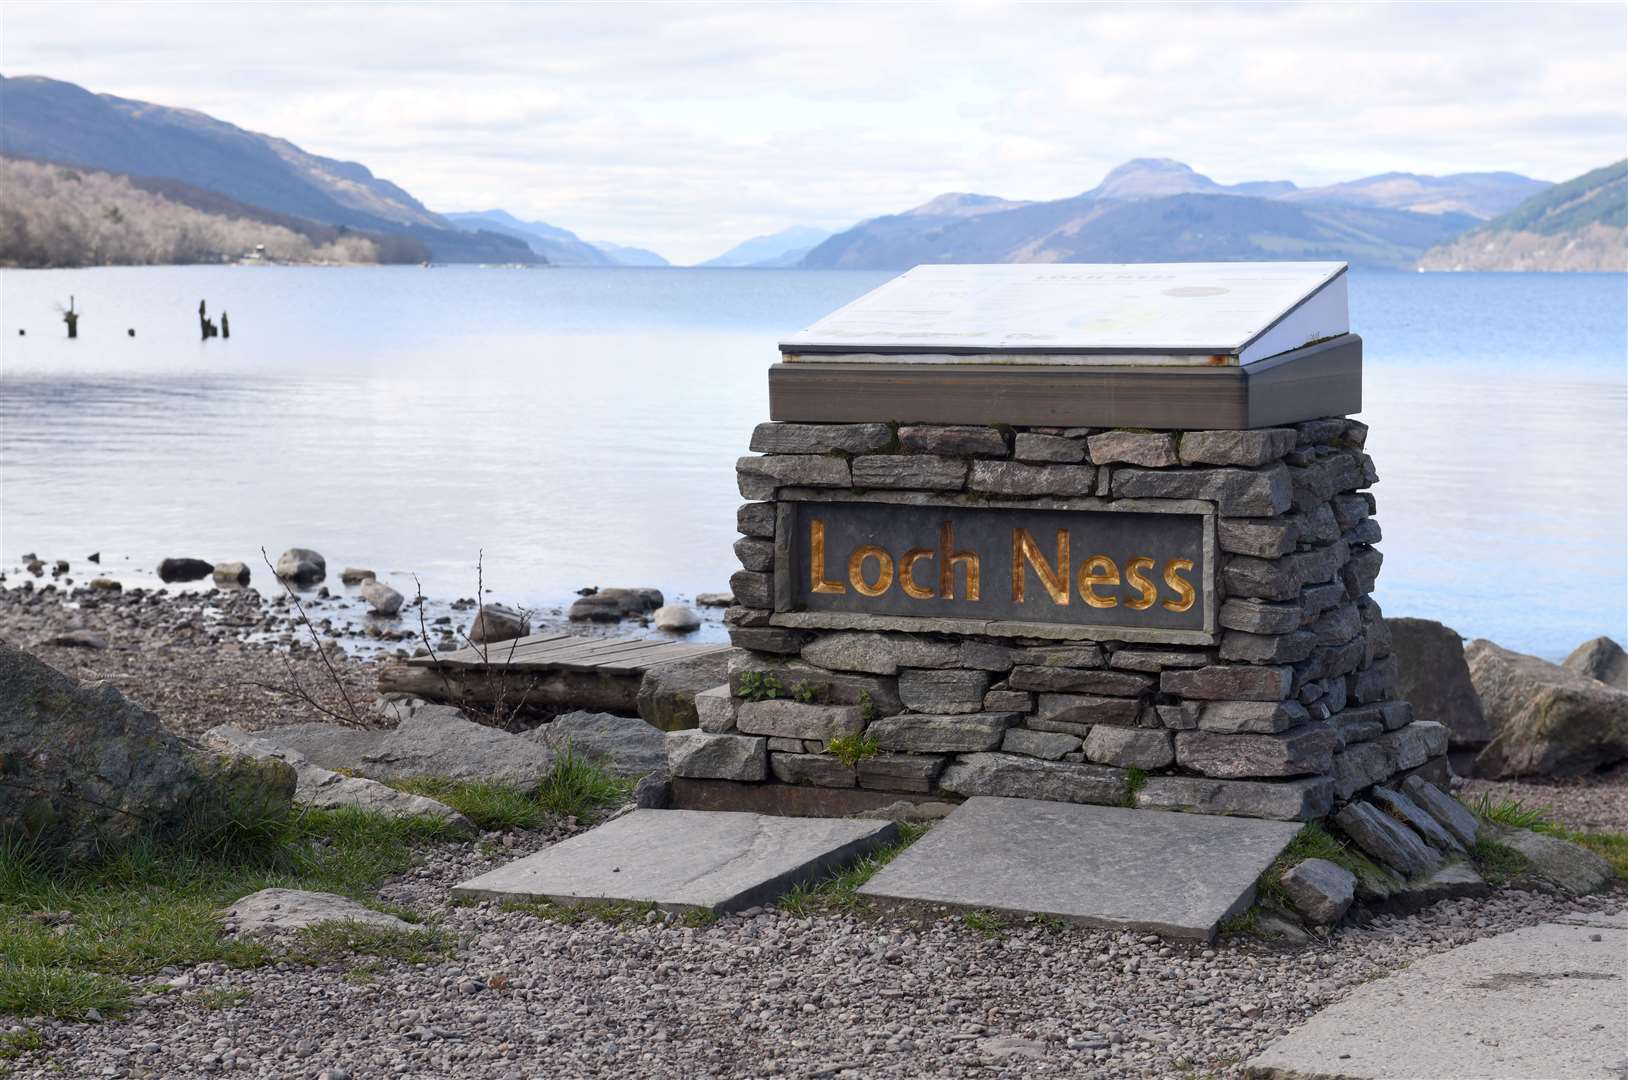 The name of Loch Ness is known around the world.